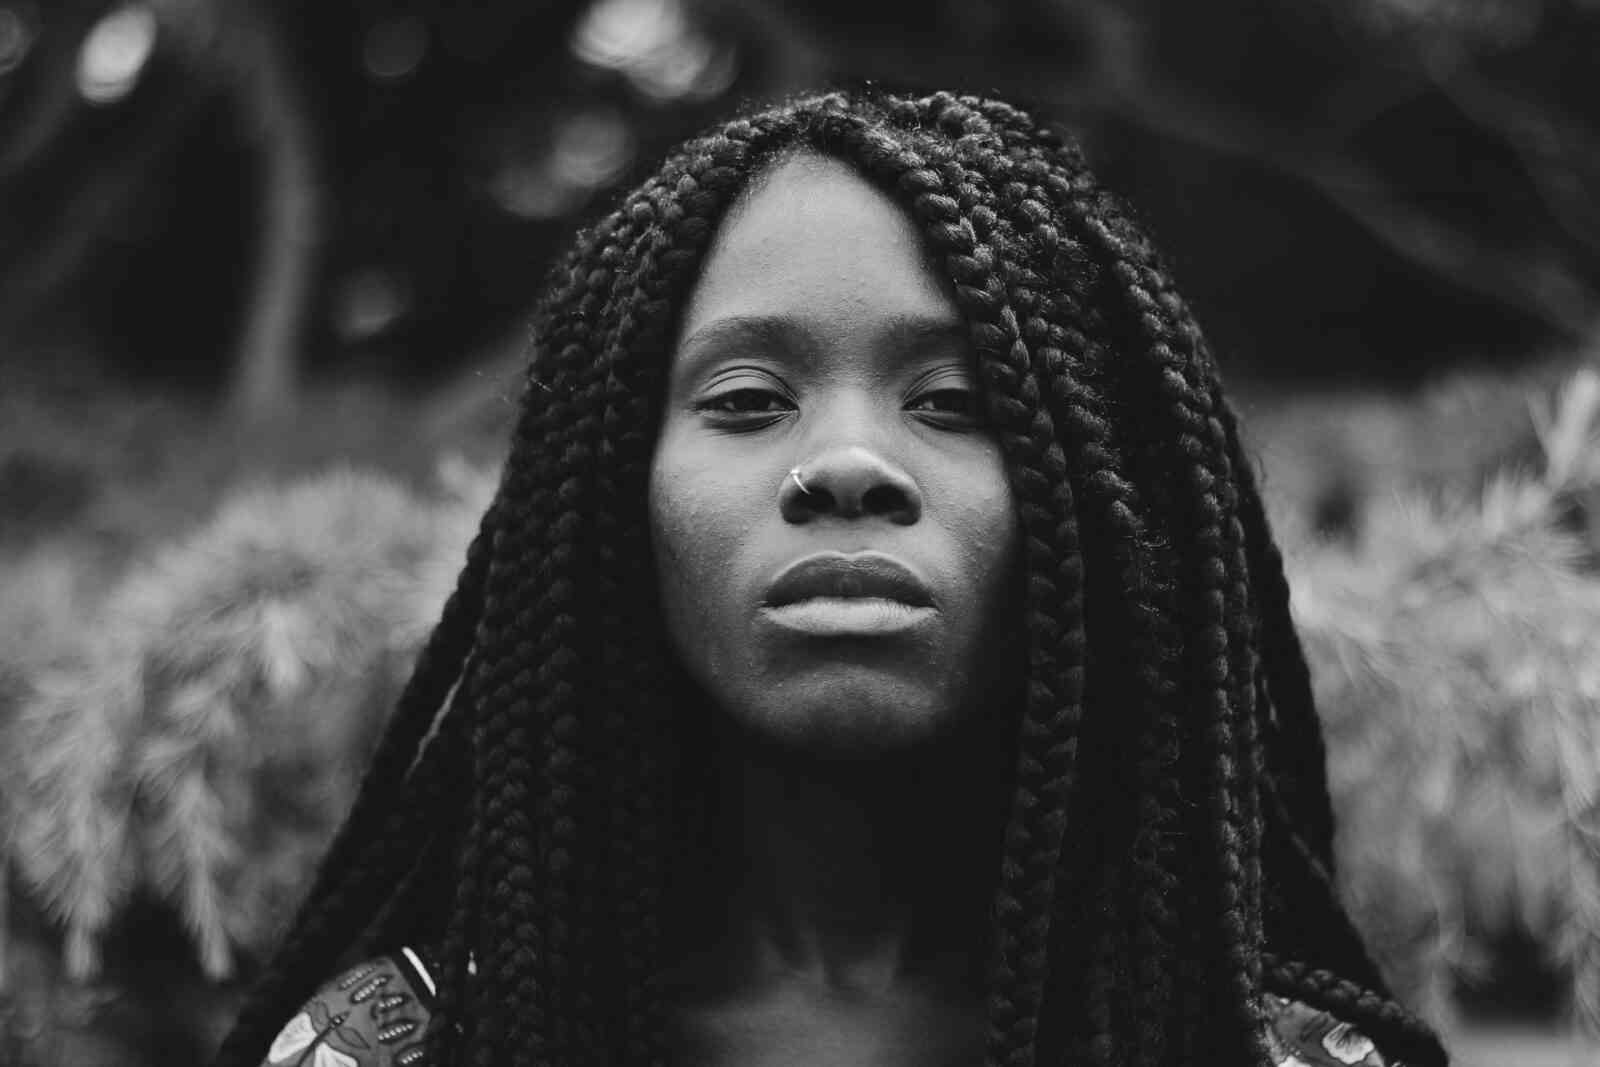 Anhedonia: a common depression symptom. It involves numbness and inability to feel pleasure. Image shows a sad, thoughtful Black woman with braids.